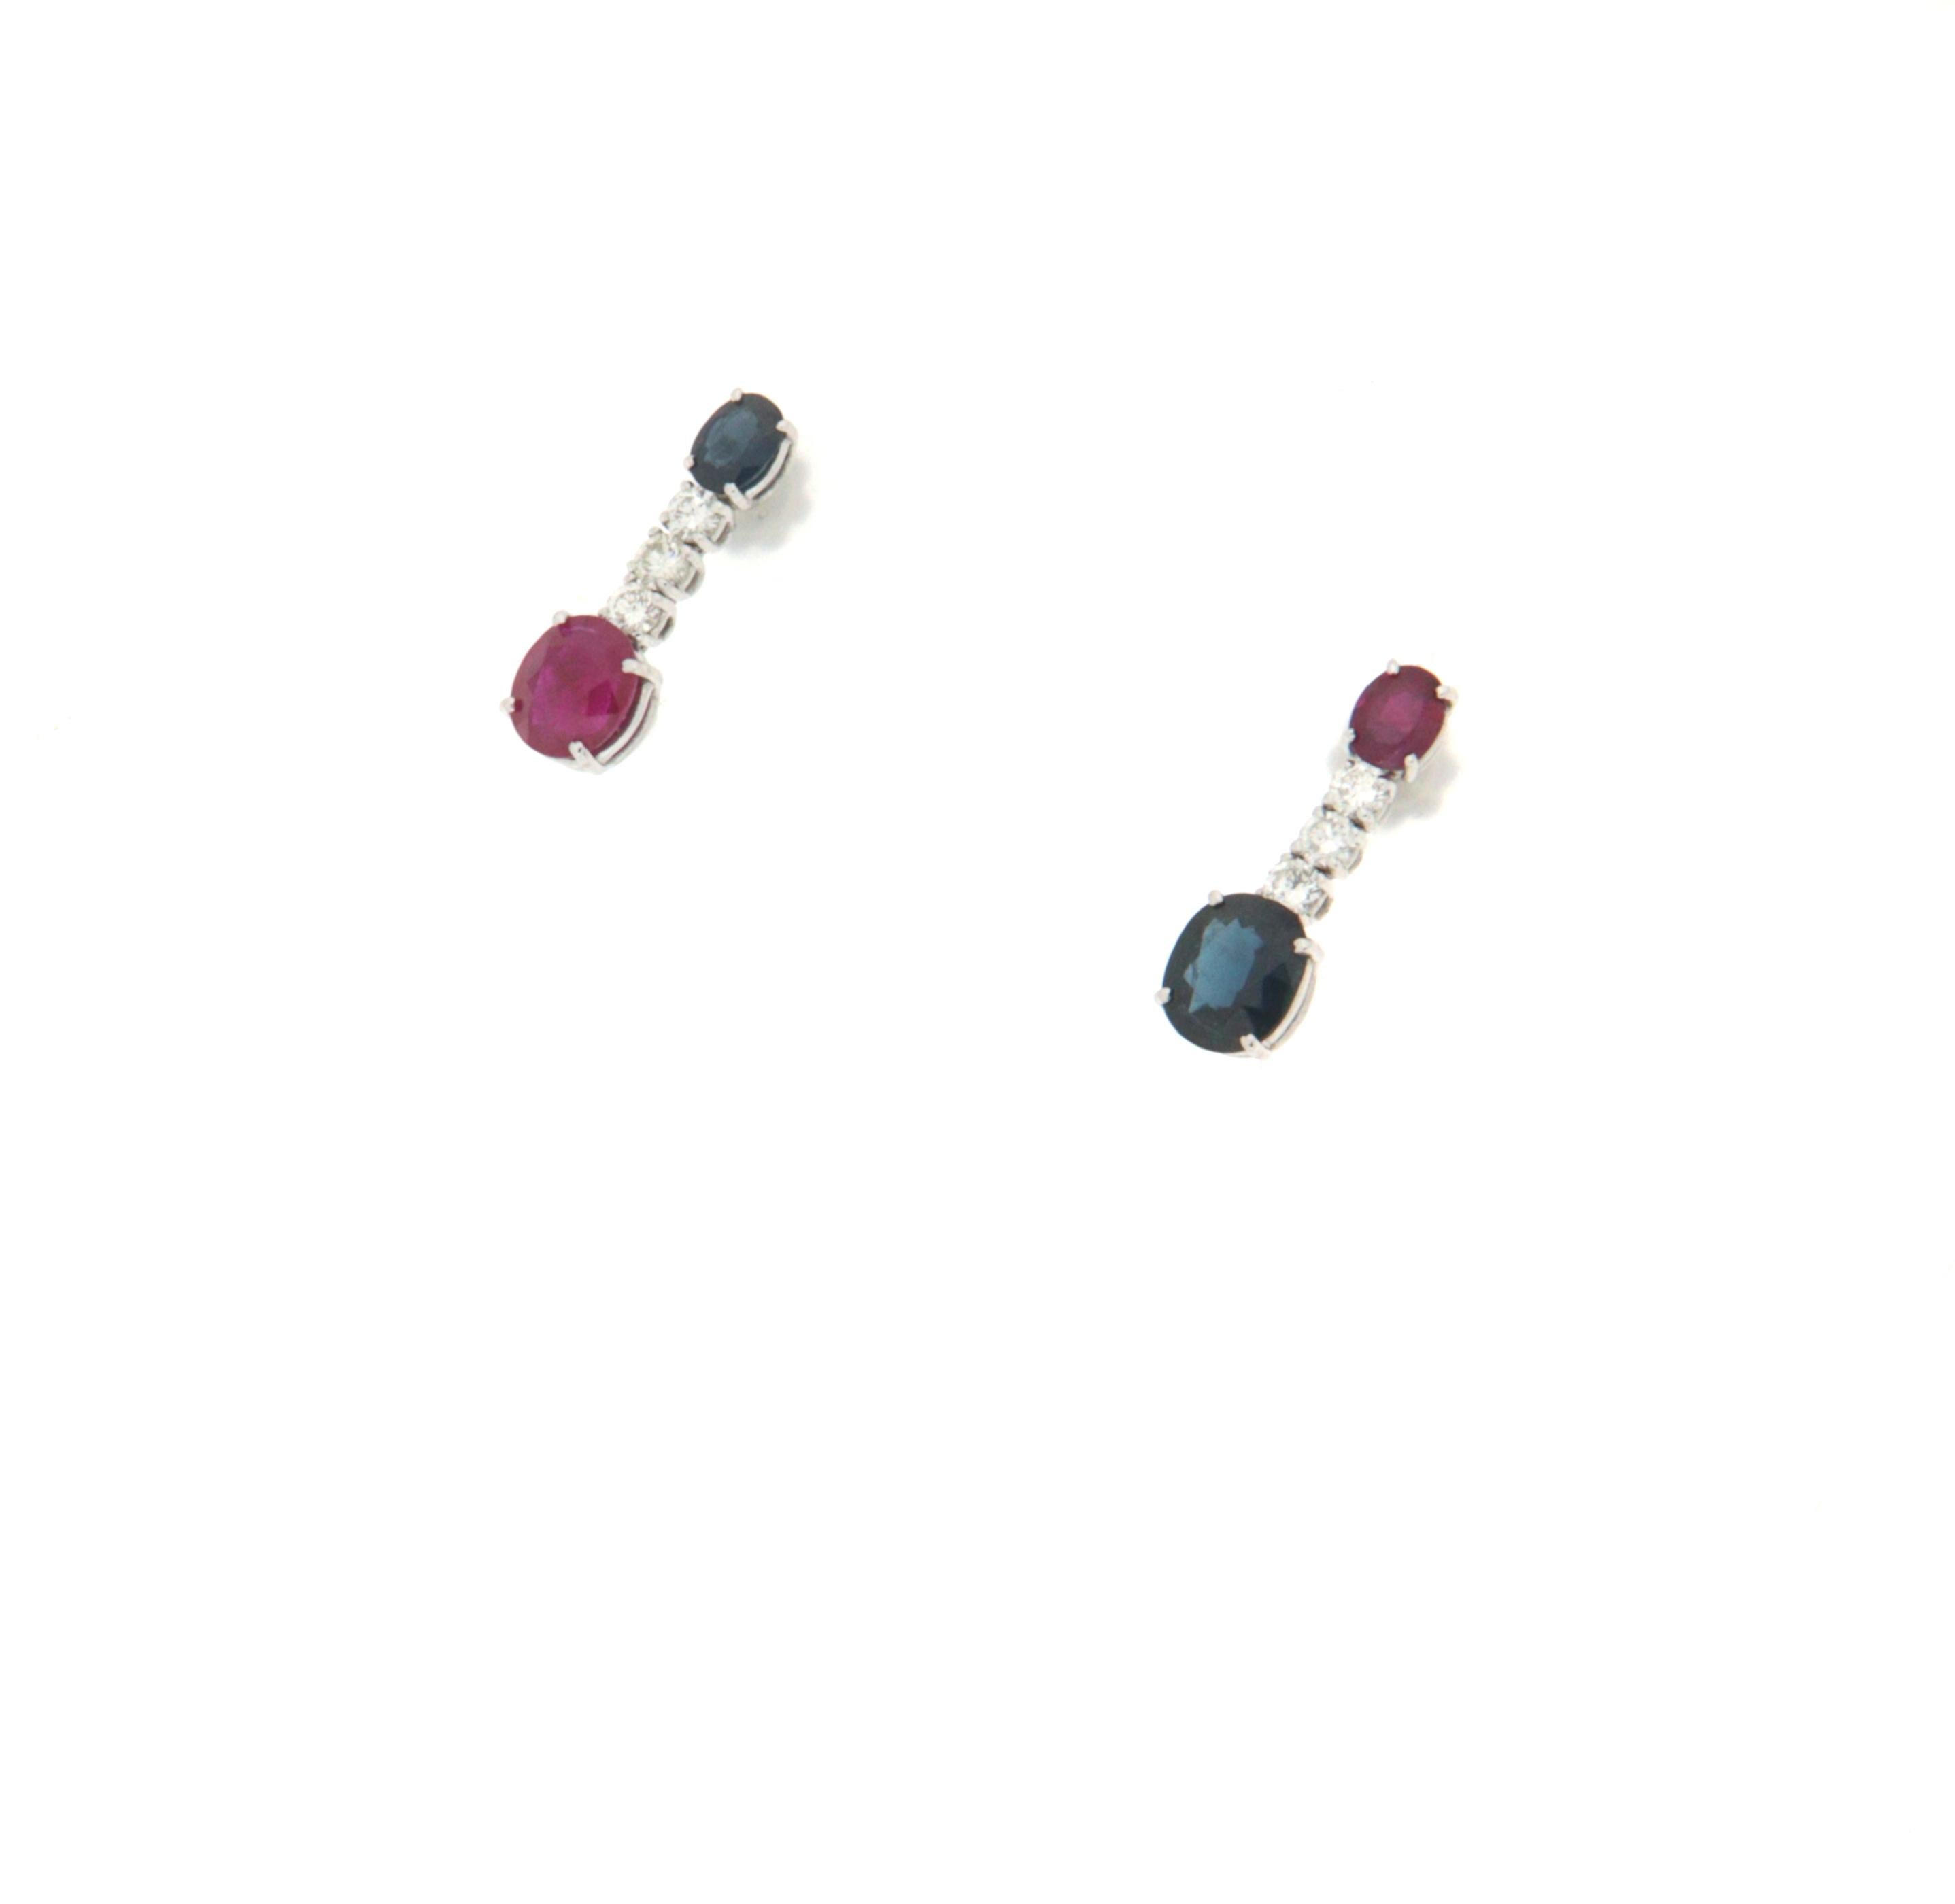 Gorgeous 18k white gold pendant earring handcrafted with brilliant sapphires and natural rubies.

The total weight of the earring is 5.00 grams

The diamonds weigh Karati 0.69

The oval cut rubies both weigh 2.91 carats

The oval cut sapphires both